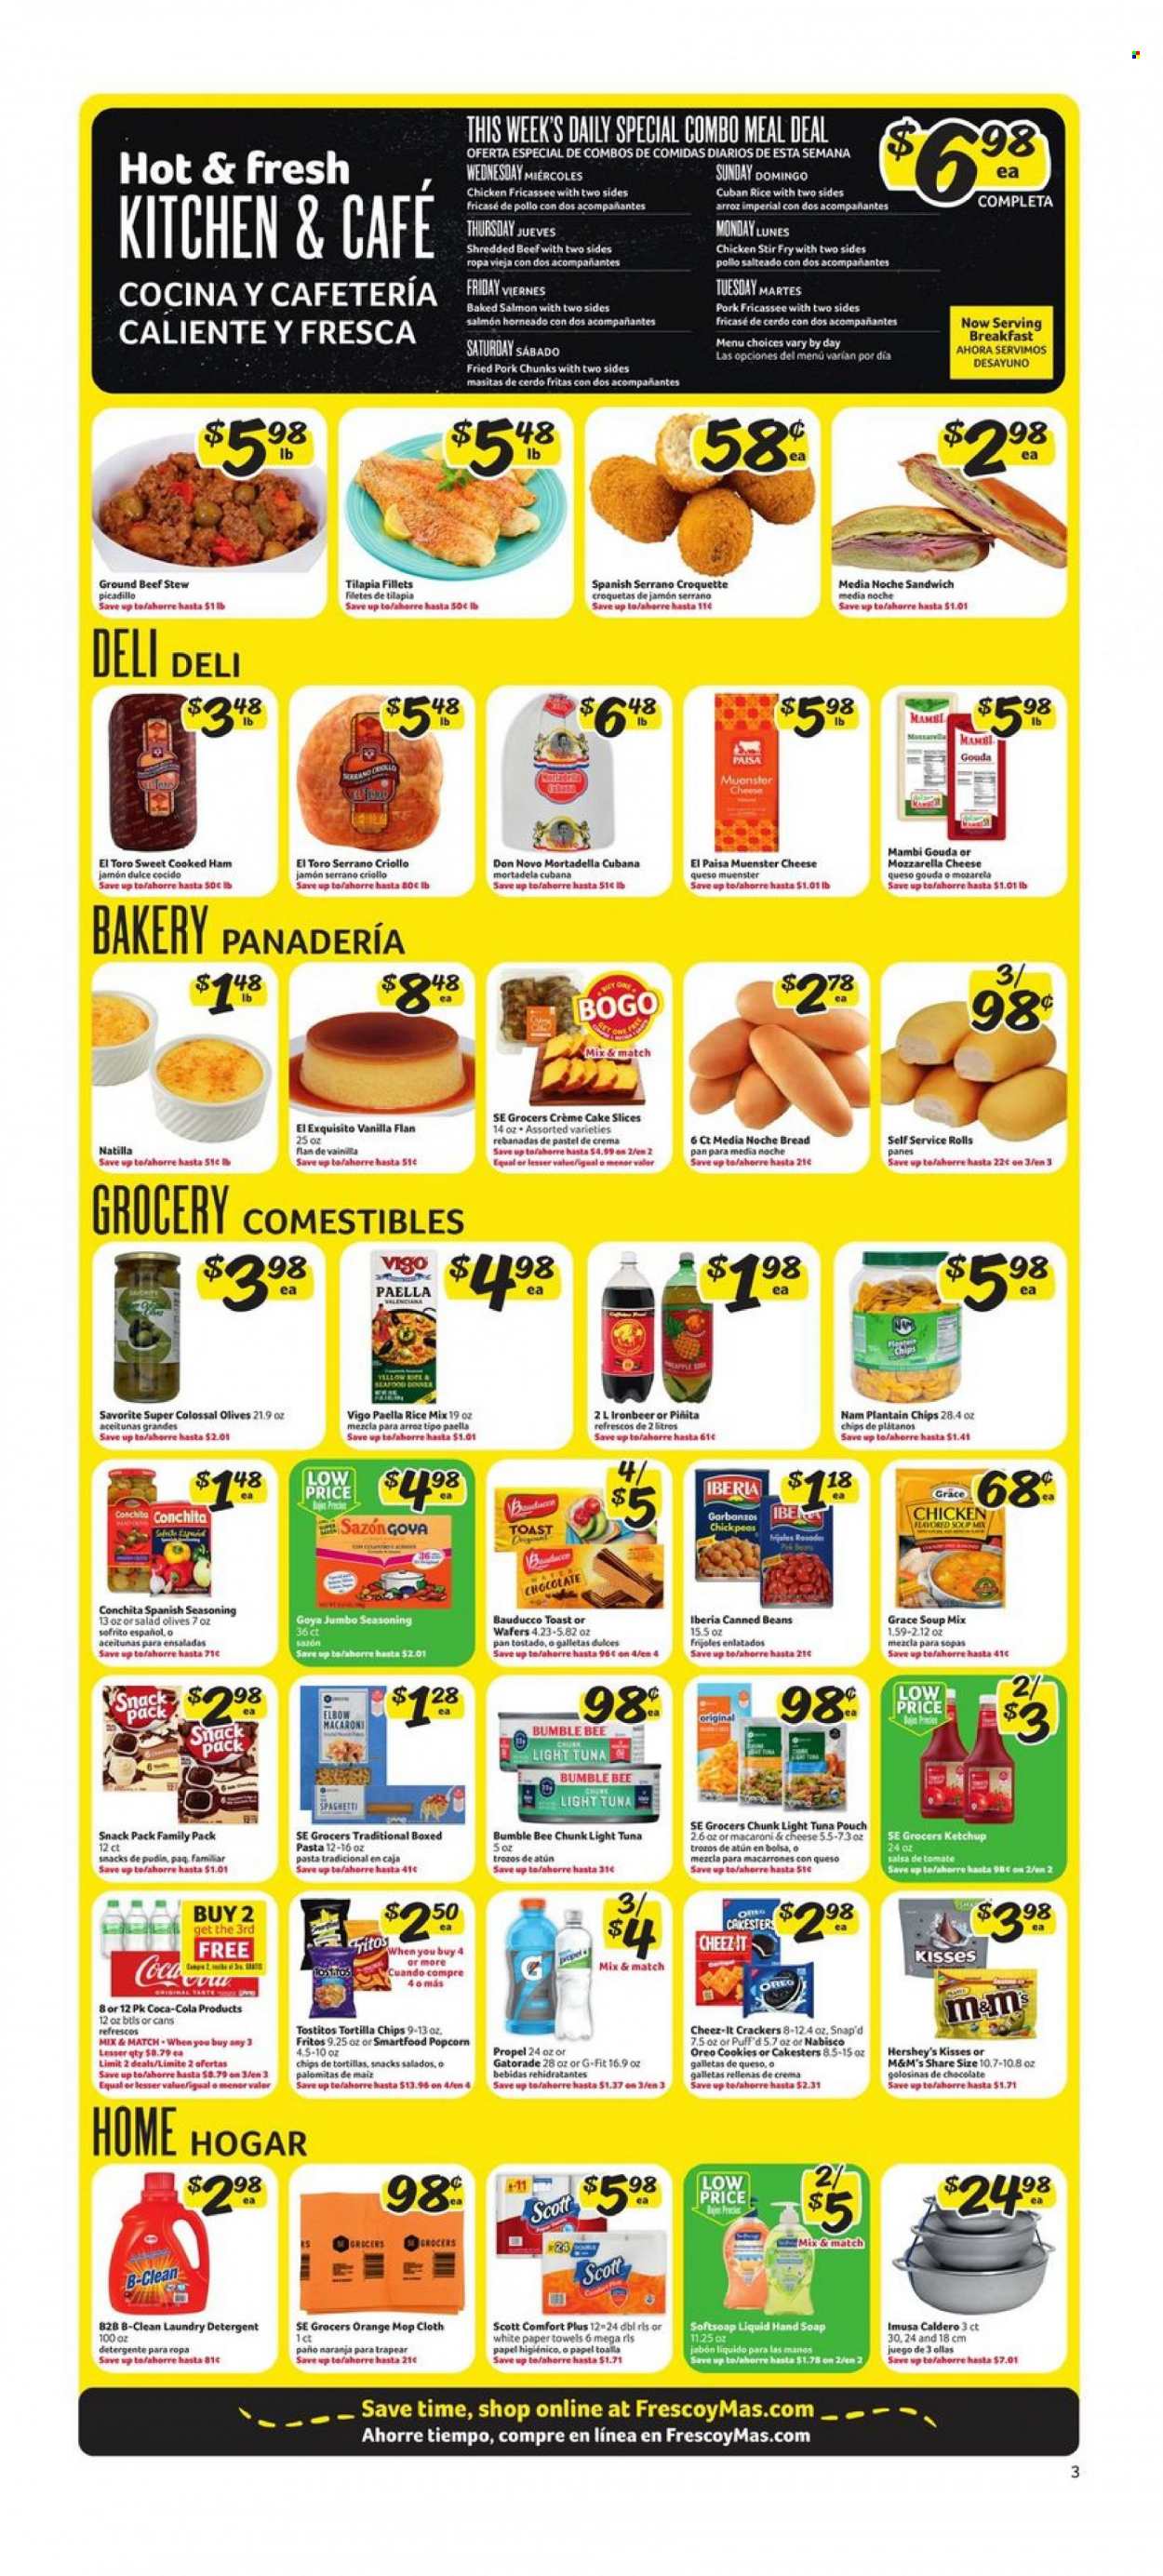 thumbnail - Fresco y Más Flyer - 03/22/2023 - 03/28/2023 - Sales products - bread, cake, cream pie, beans, oranges, salmon, tilapia, tuna, seafood, macaroni & cheese, spaghetti, soup mix, soup, pasta, Bumble Bee, cooked ham, mortadella, ham, gouda, mozzarella, Münster cheese, Oreo, Hershey's, paella, cookies, wafers, chocolate, M&M's, crackers, Fritos, tortilla chips, chips, Smartfood, popcorn, Cheez-It, Tostitos, olives, light tuna, Goya, chickpeas, spice, ketchup, salsa, Coca-Cola, Gatorade, water, chicken, beef meat, ground beef. Page 4.